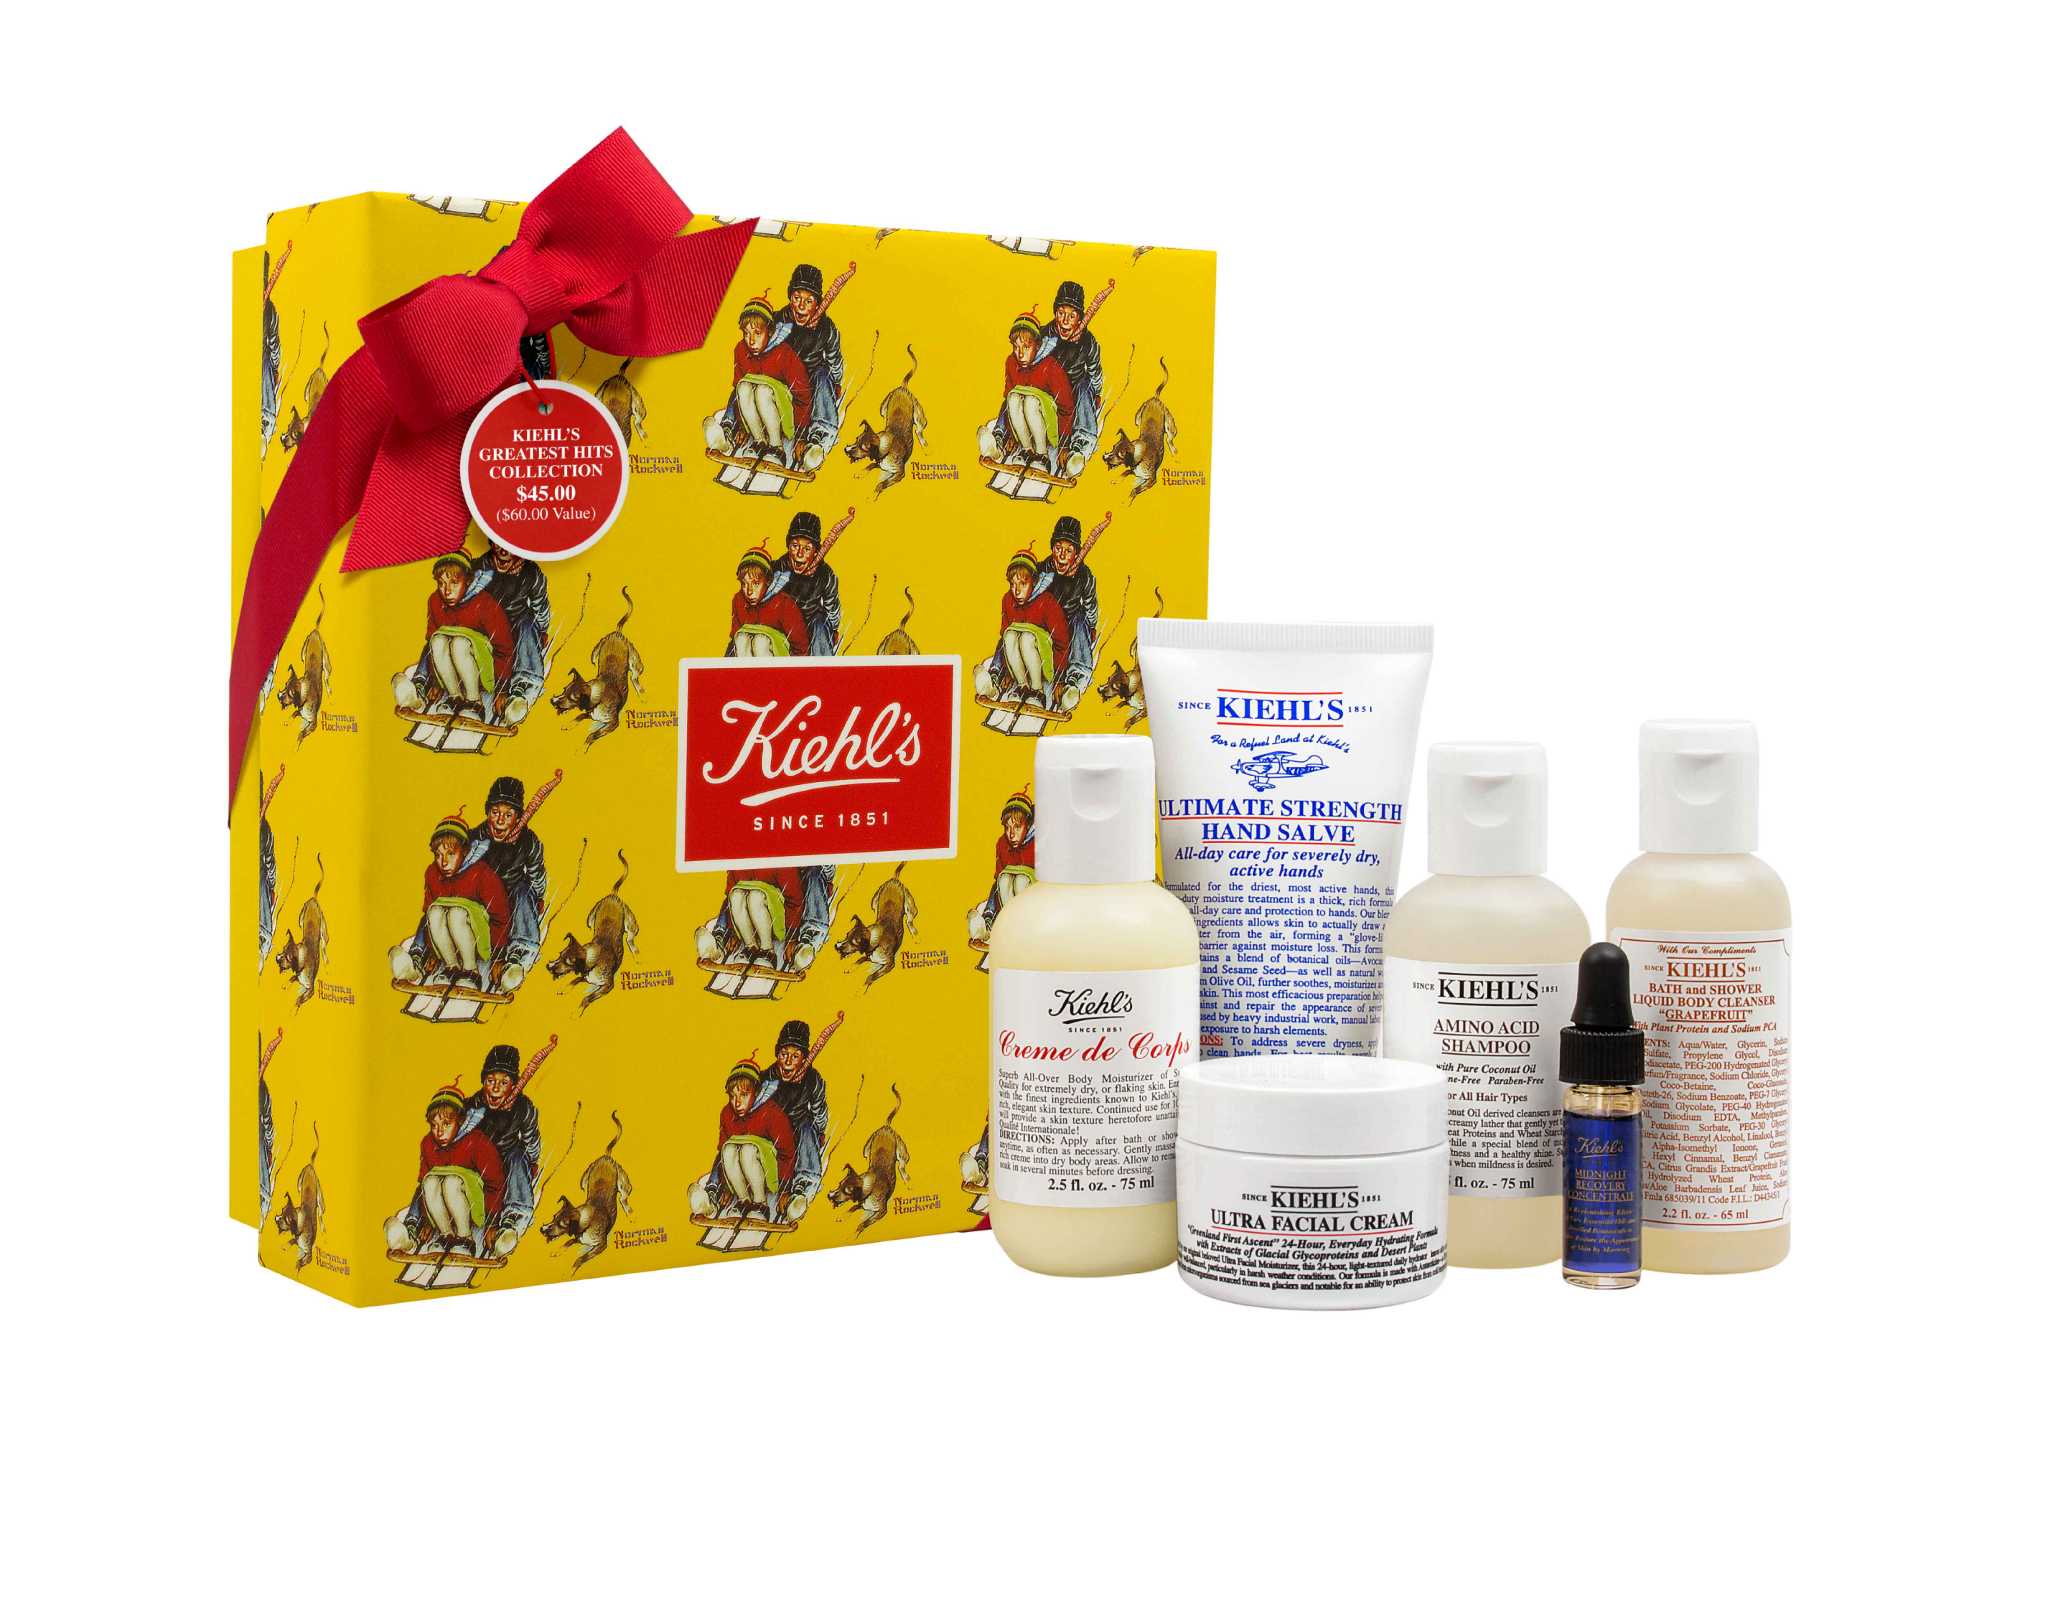 Kiehl's holiday collection helps Americans in need